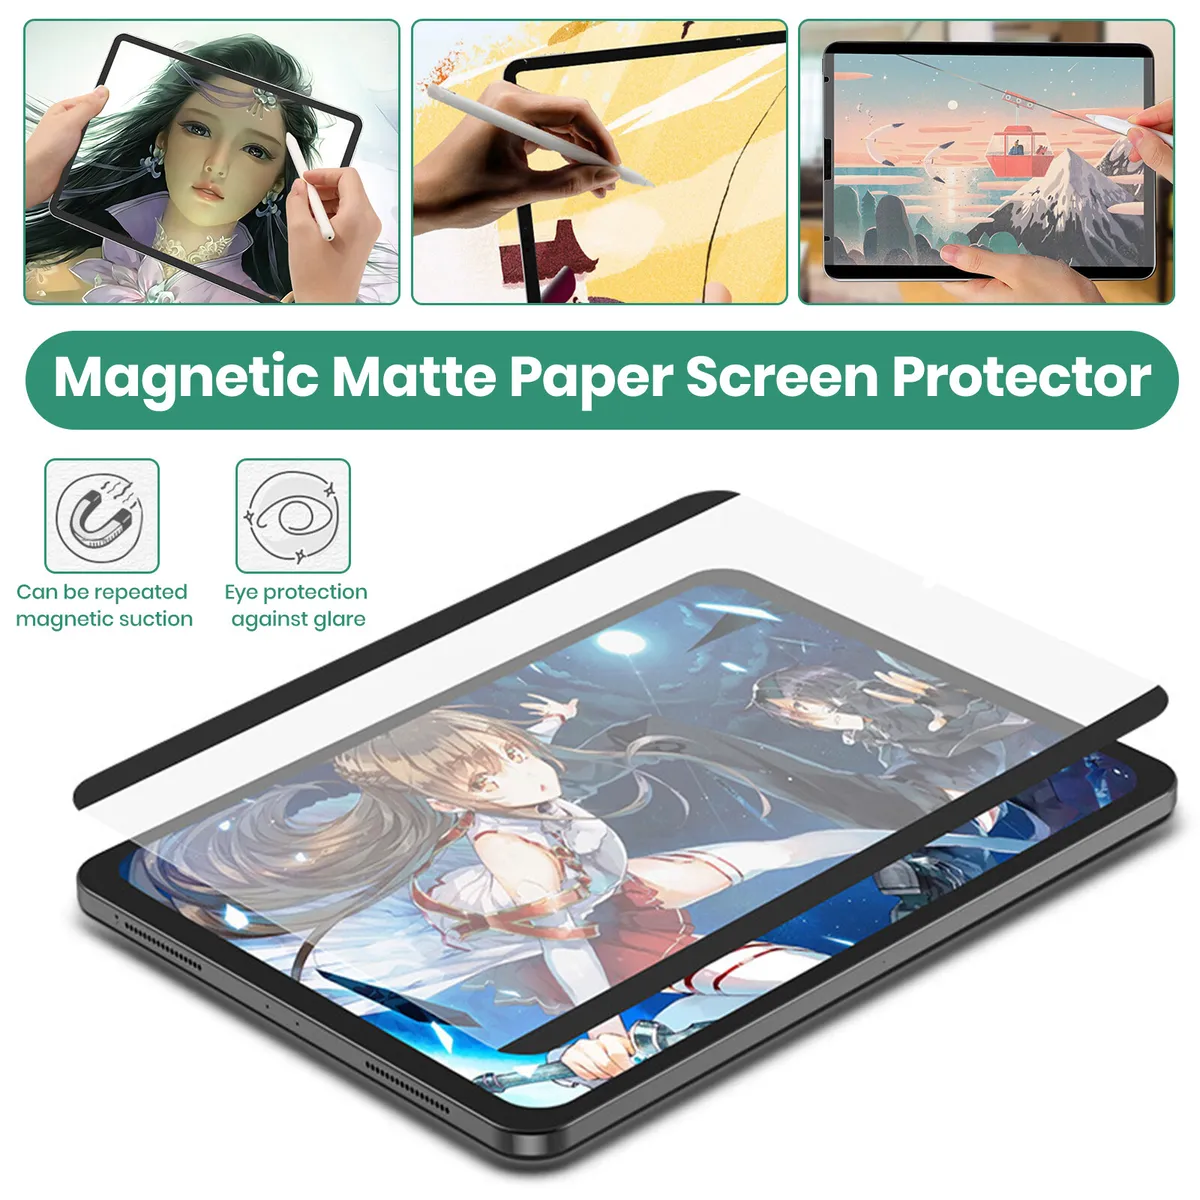 Magnetic Like Paper Removable Matte Screen Protector for iPad 7 8 9th  Generation